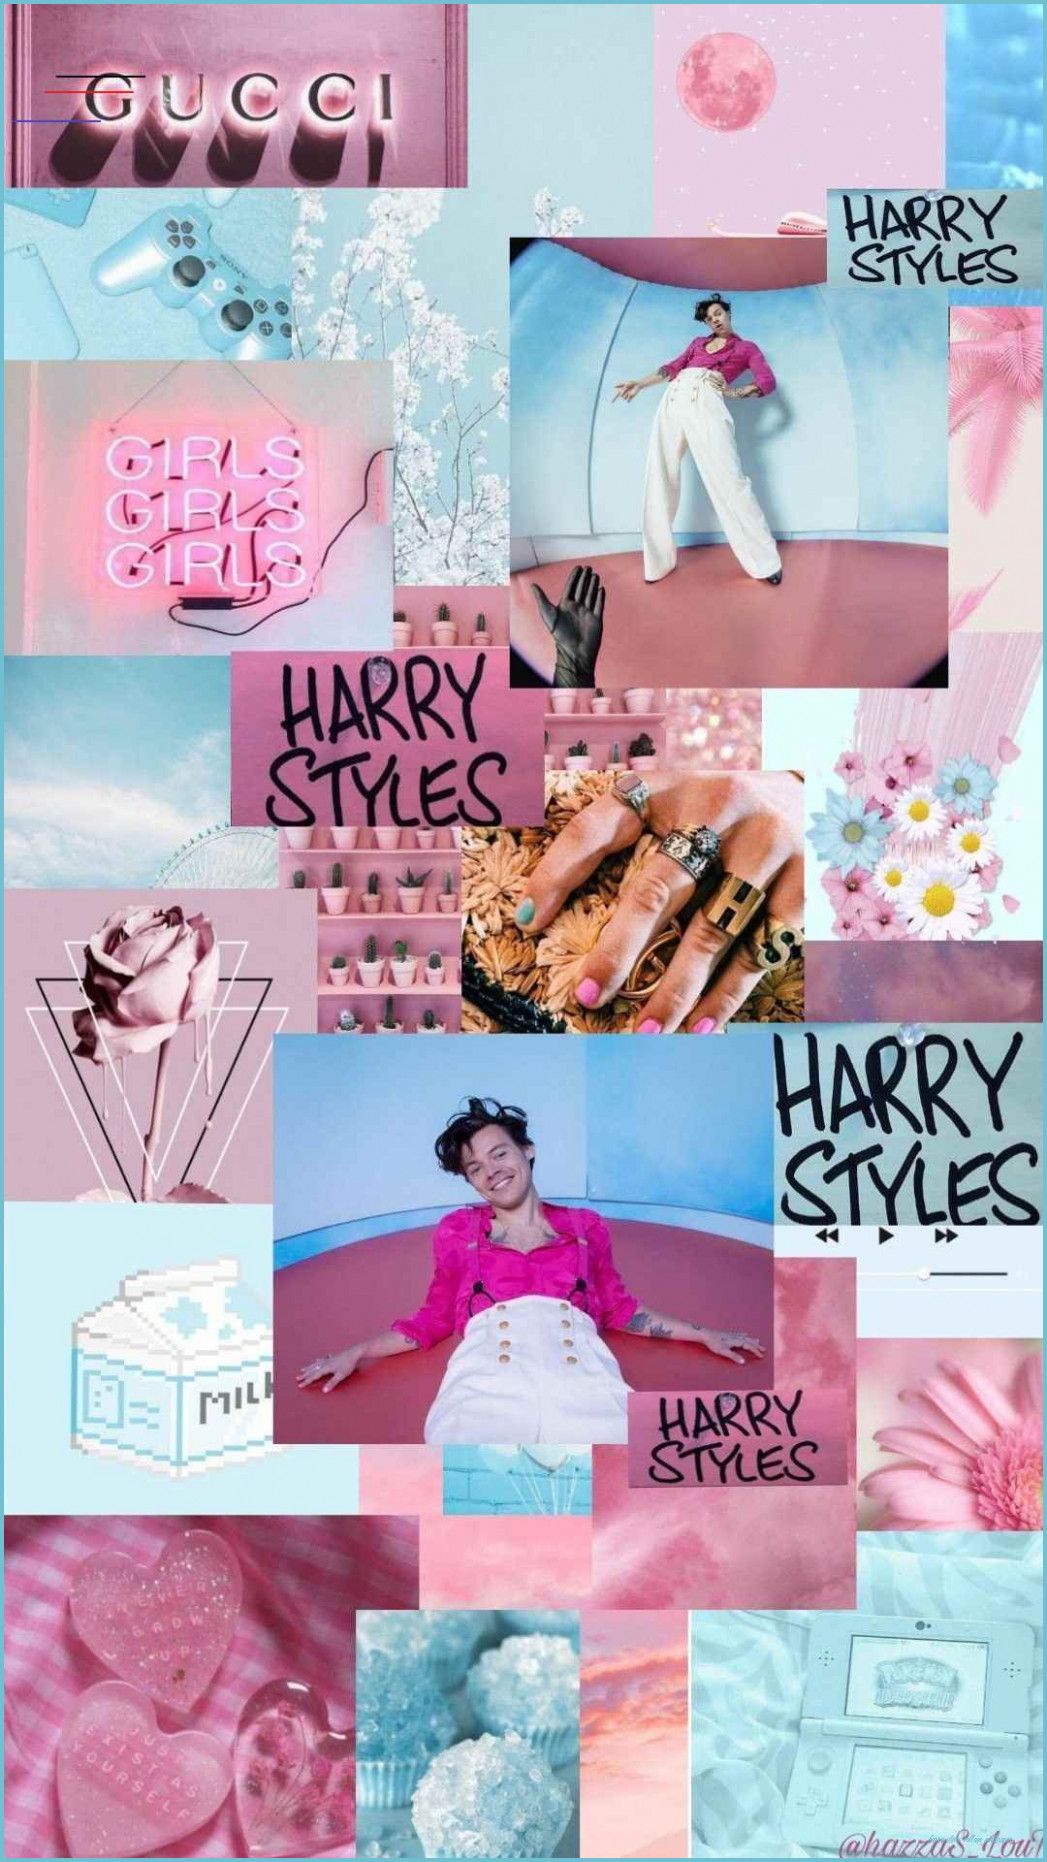 Wallpaper, background, collage, aesthetic, Harry Styles, Rock Star styles collage wallpaper